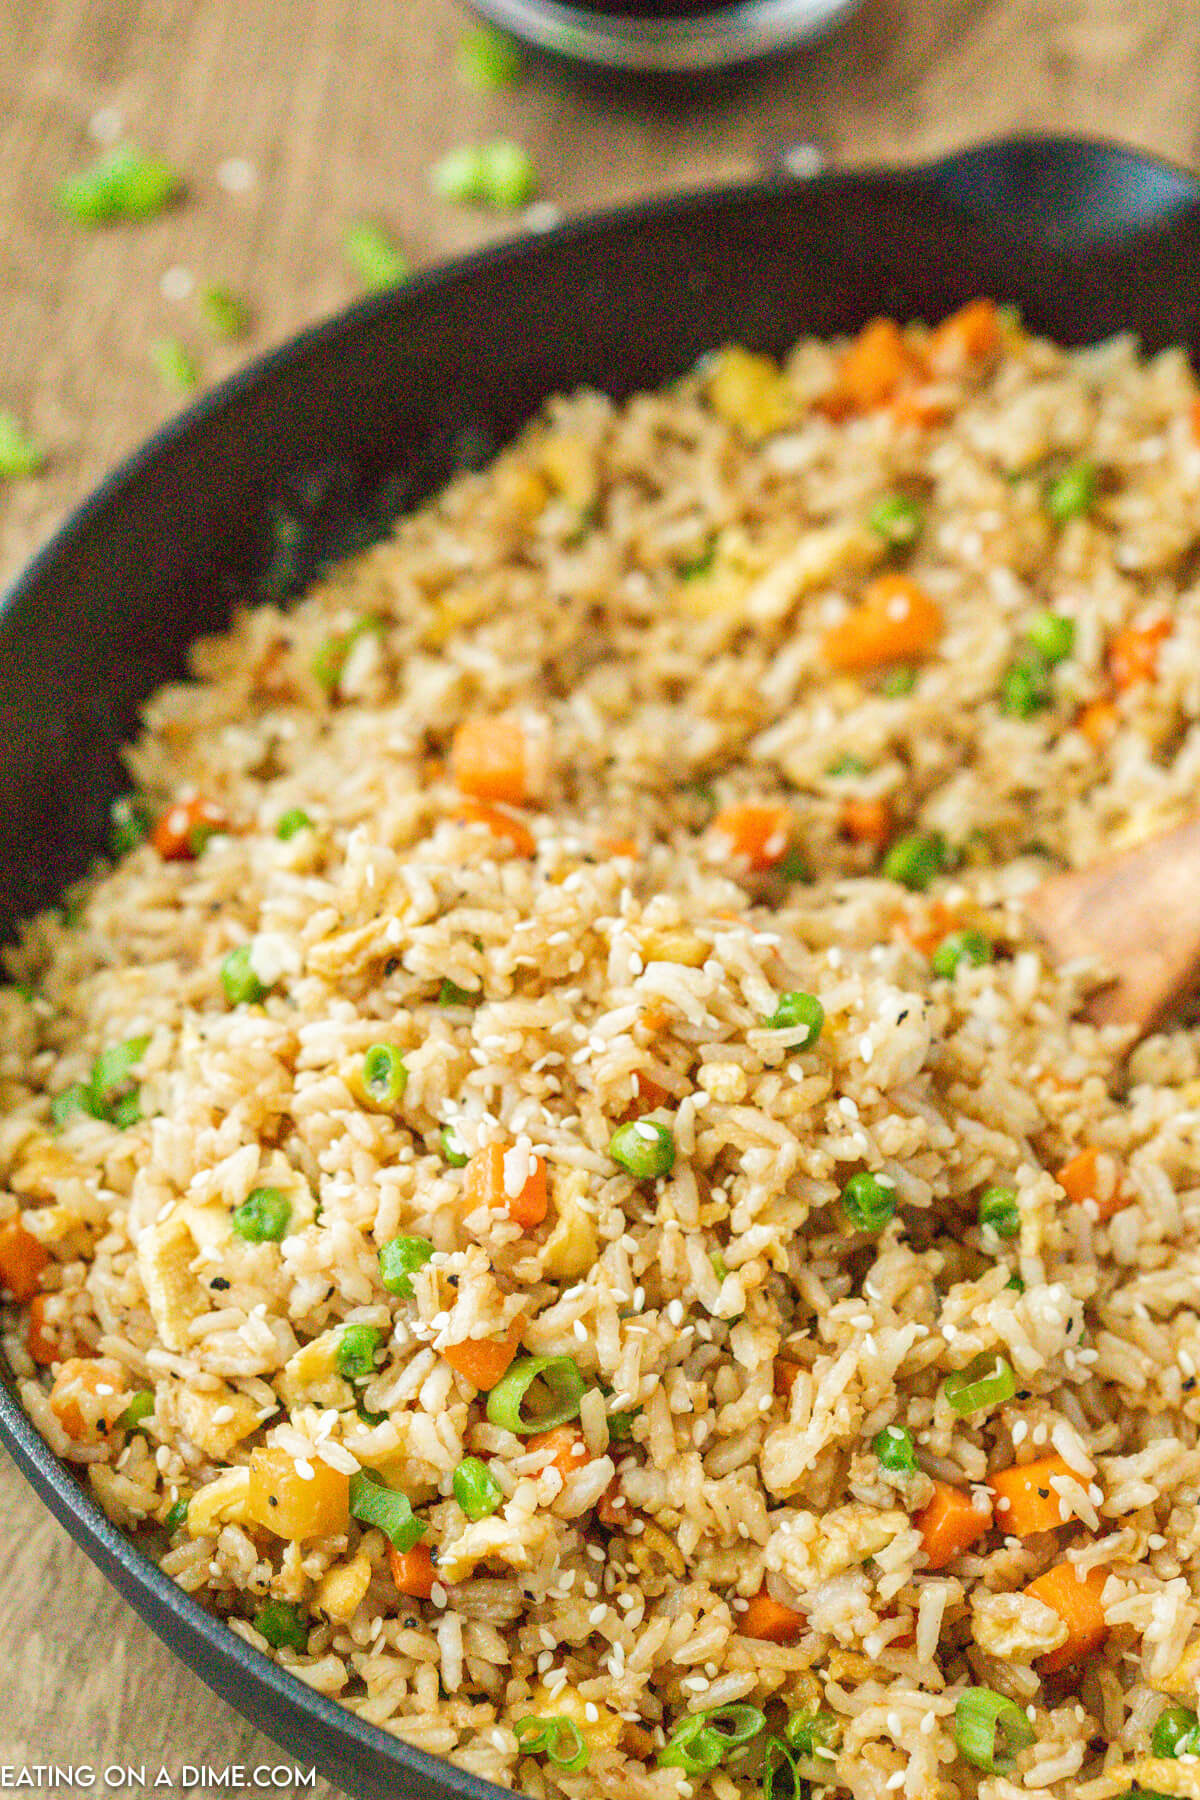 Following These Steps in Cooking Rice Could Save You Money